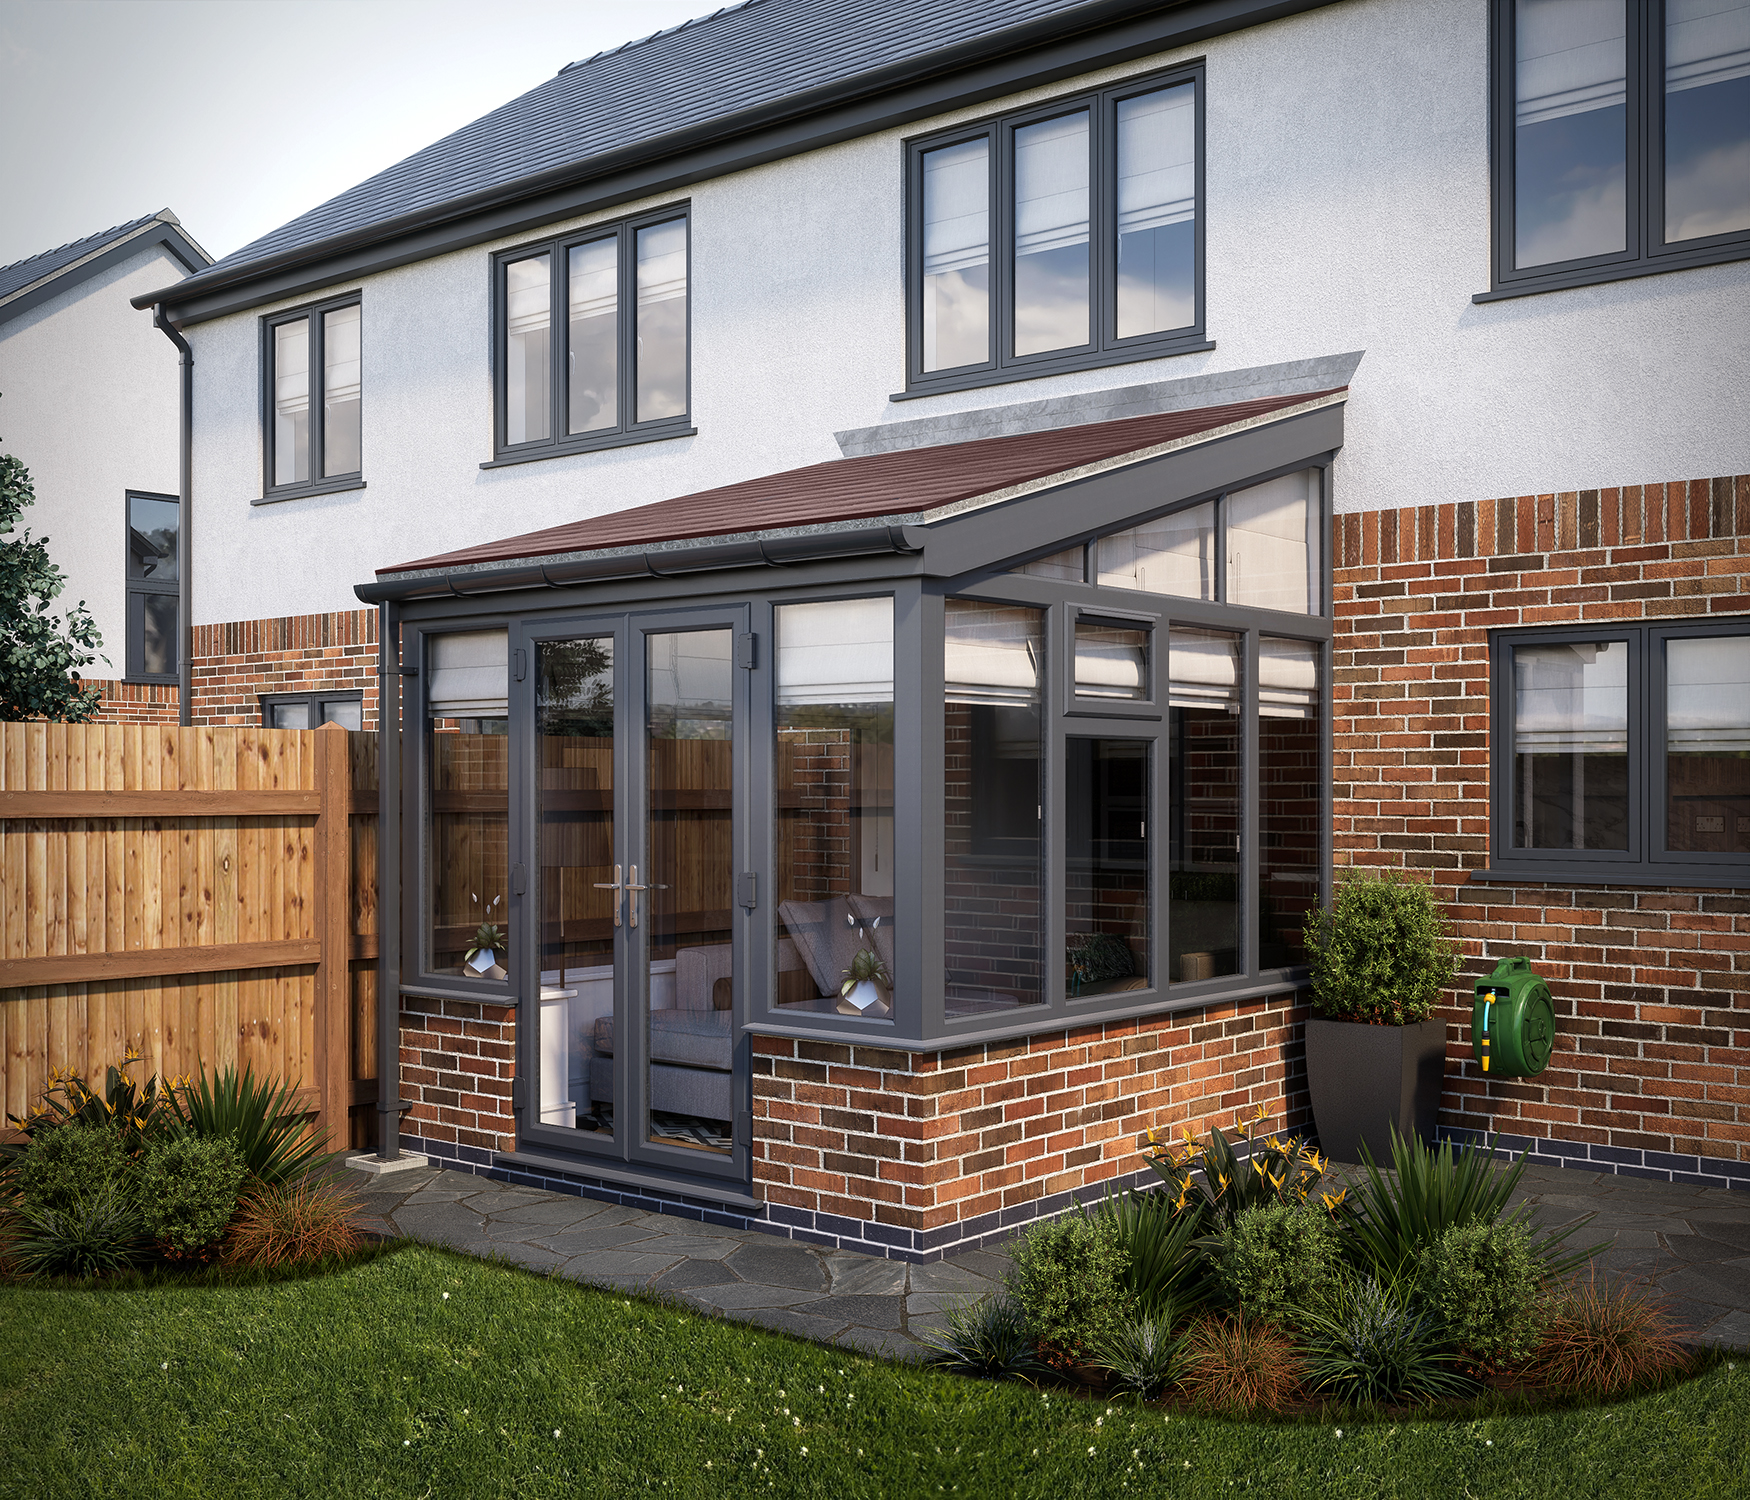 Image of SOLid Roof Lean to Conservatory Grey Frames Dwarf Wall with Rustic Brown Tiles - 13 x 13ft